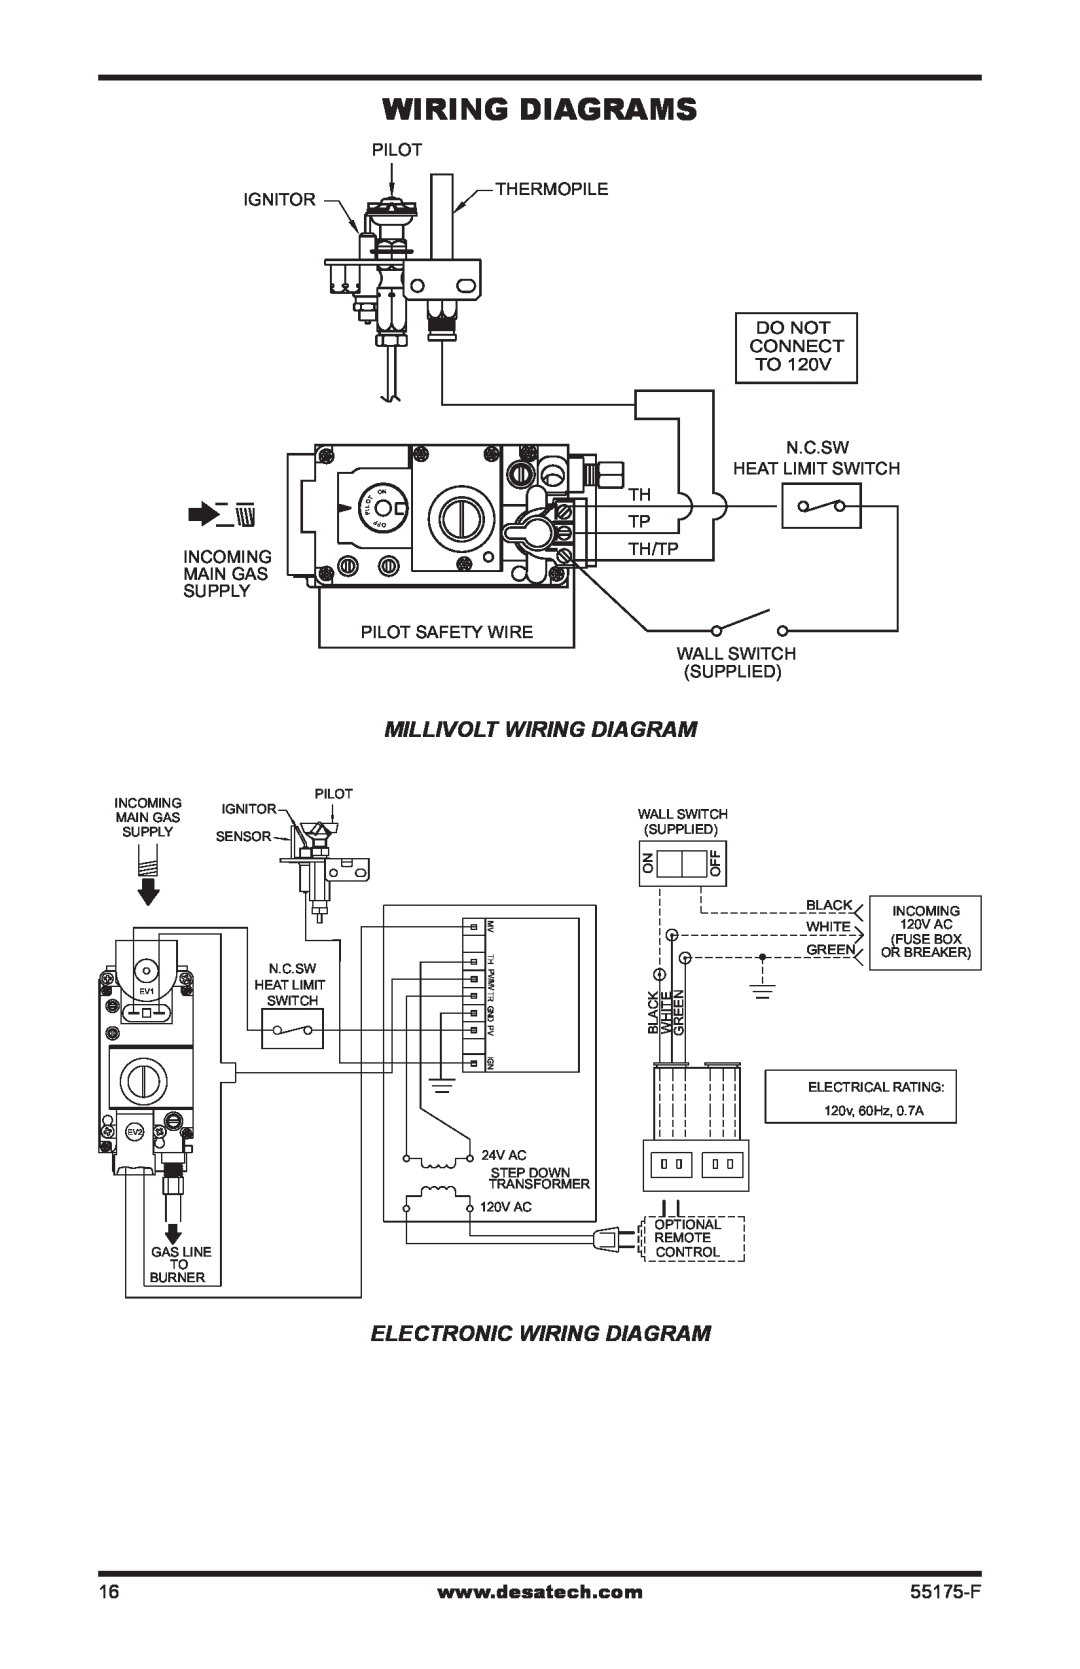 Desa GL36PNE Wiring Diagrams, Millivolt Wiring Diagram, Electronic Wiring Diagram, Pilot Ignitor Thermopile, Tp Th/Tp 